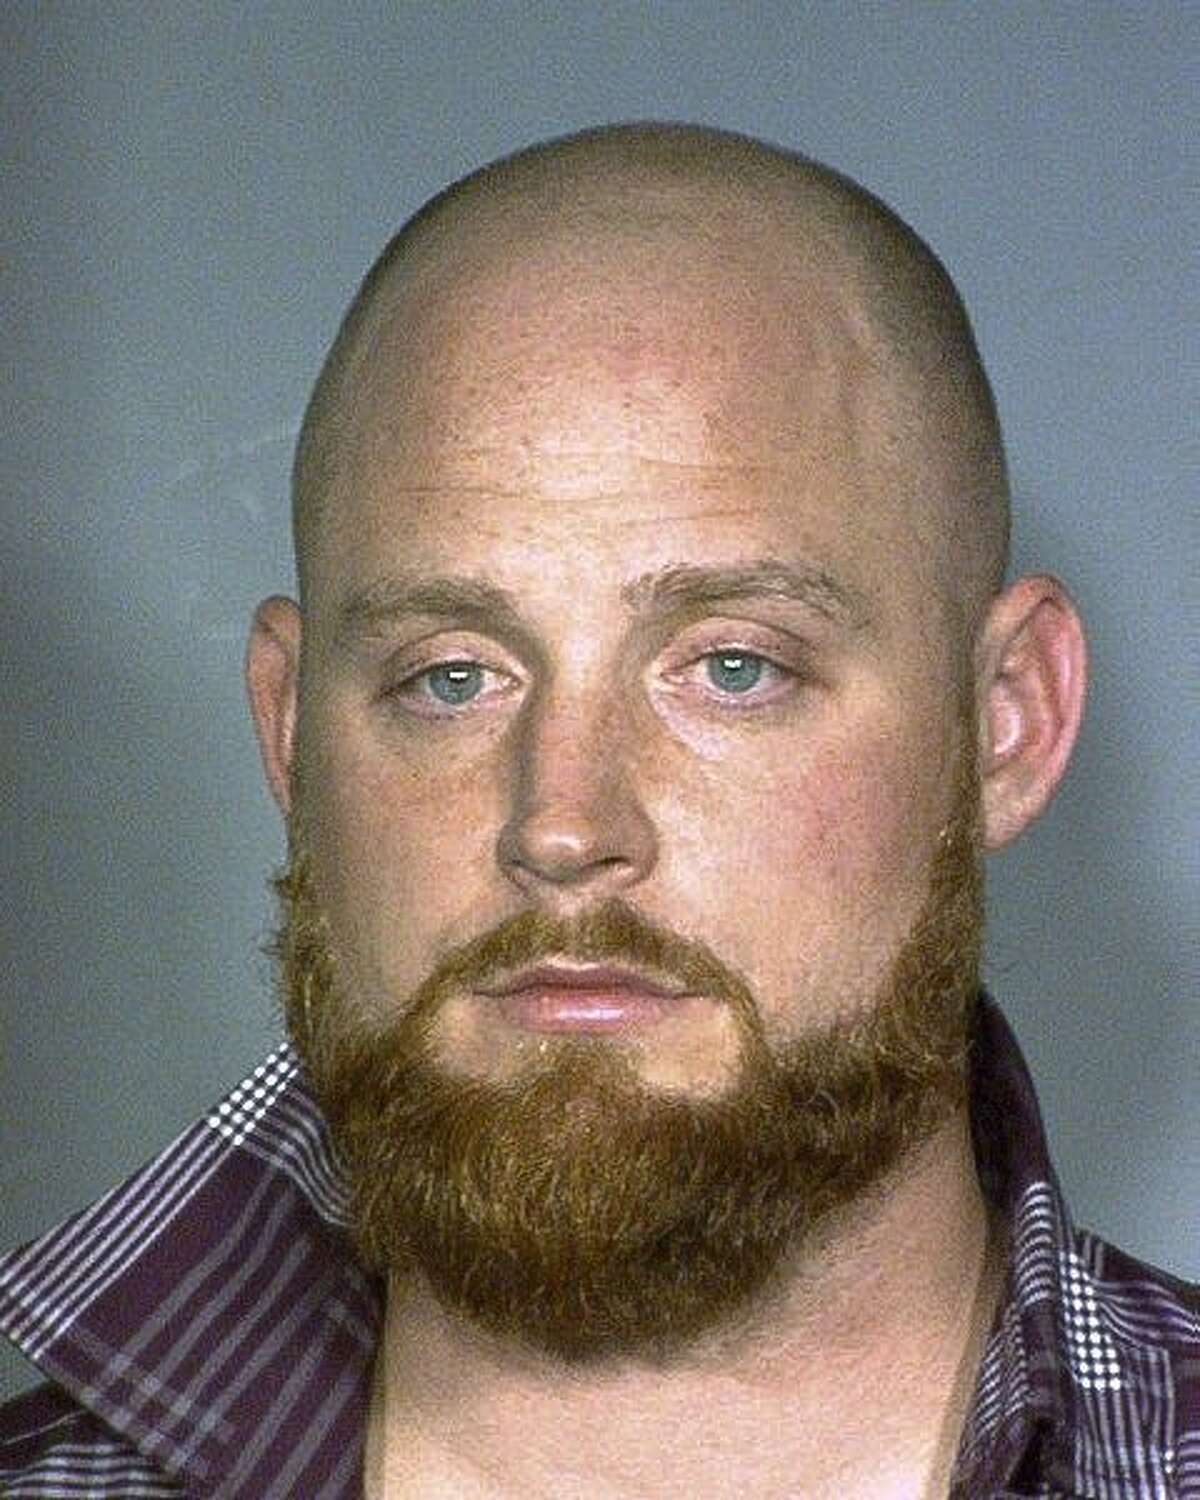 This photo released by the Las Vegas Metropolitan Police Department shows San Francisco Giants pitcher, Chad Gaudin, 30, who was arrested Jan. 27,2013, and charged with lewdness. Police say Gaudin was drunk when he approached a 23-year-old woman on a gurney at Desert Springs Hospital, told her she was gorgeous and touched her face and breast earlier this year. (AP Photo/Las Vegas Metropolitan Police Department )